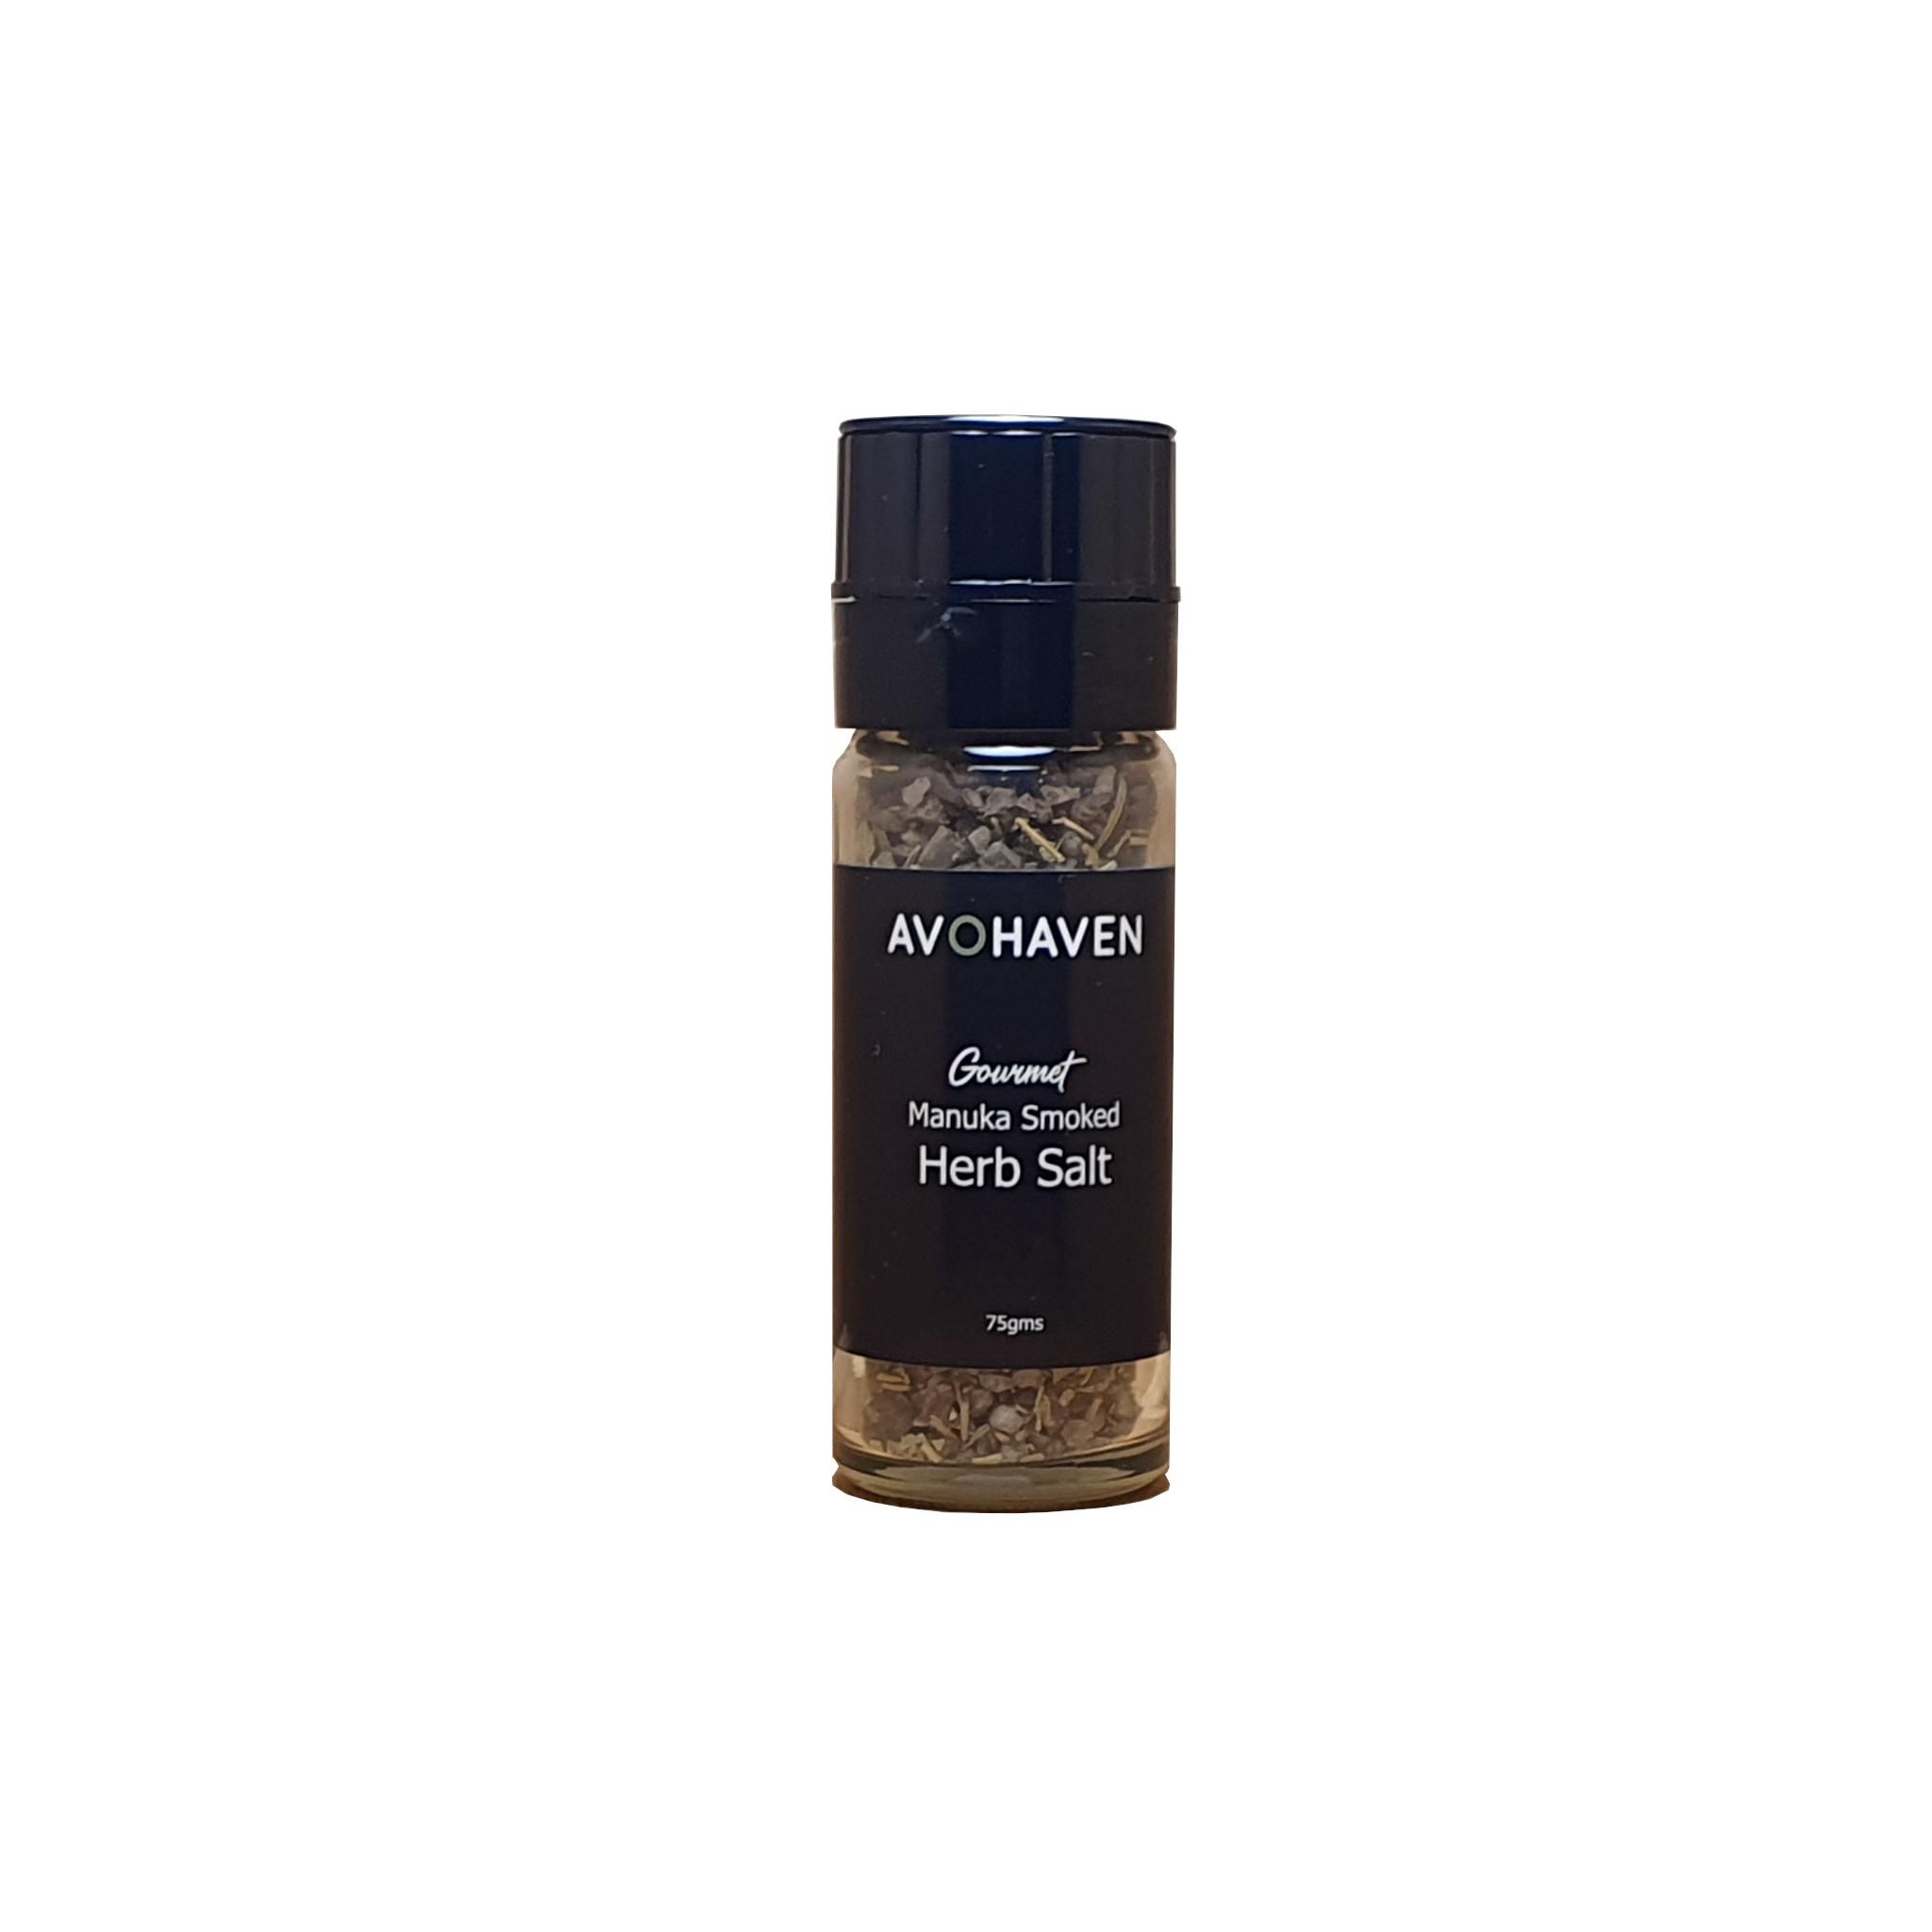 product image for Avohaven - Gourmet Smoked Herb Salt